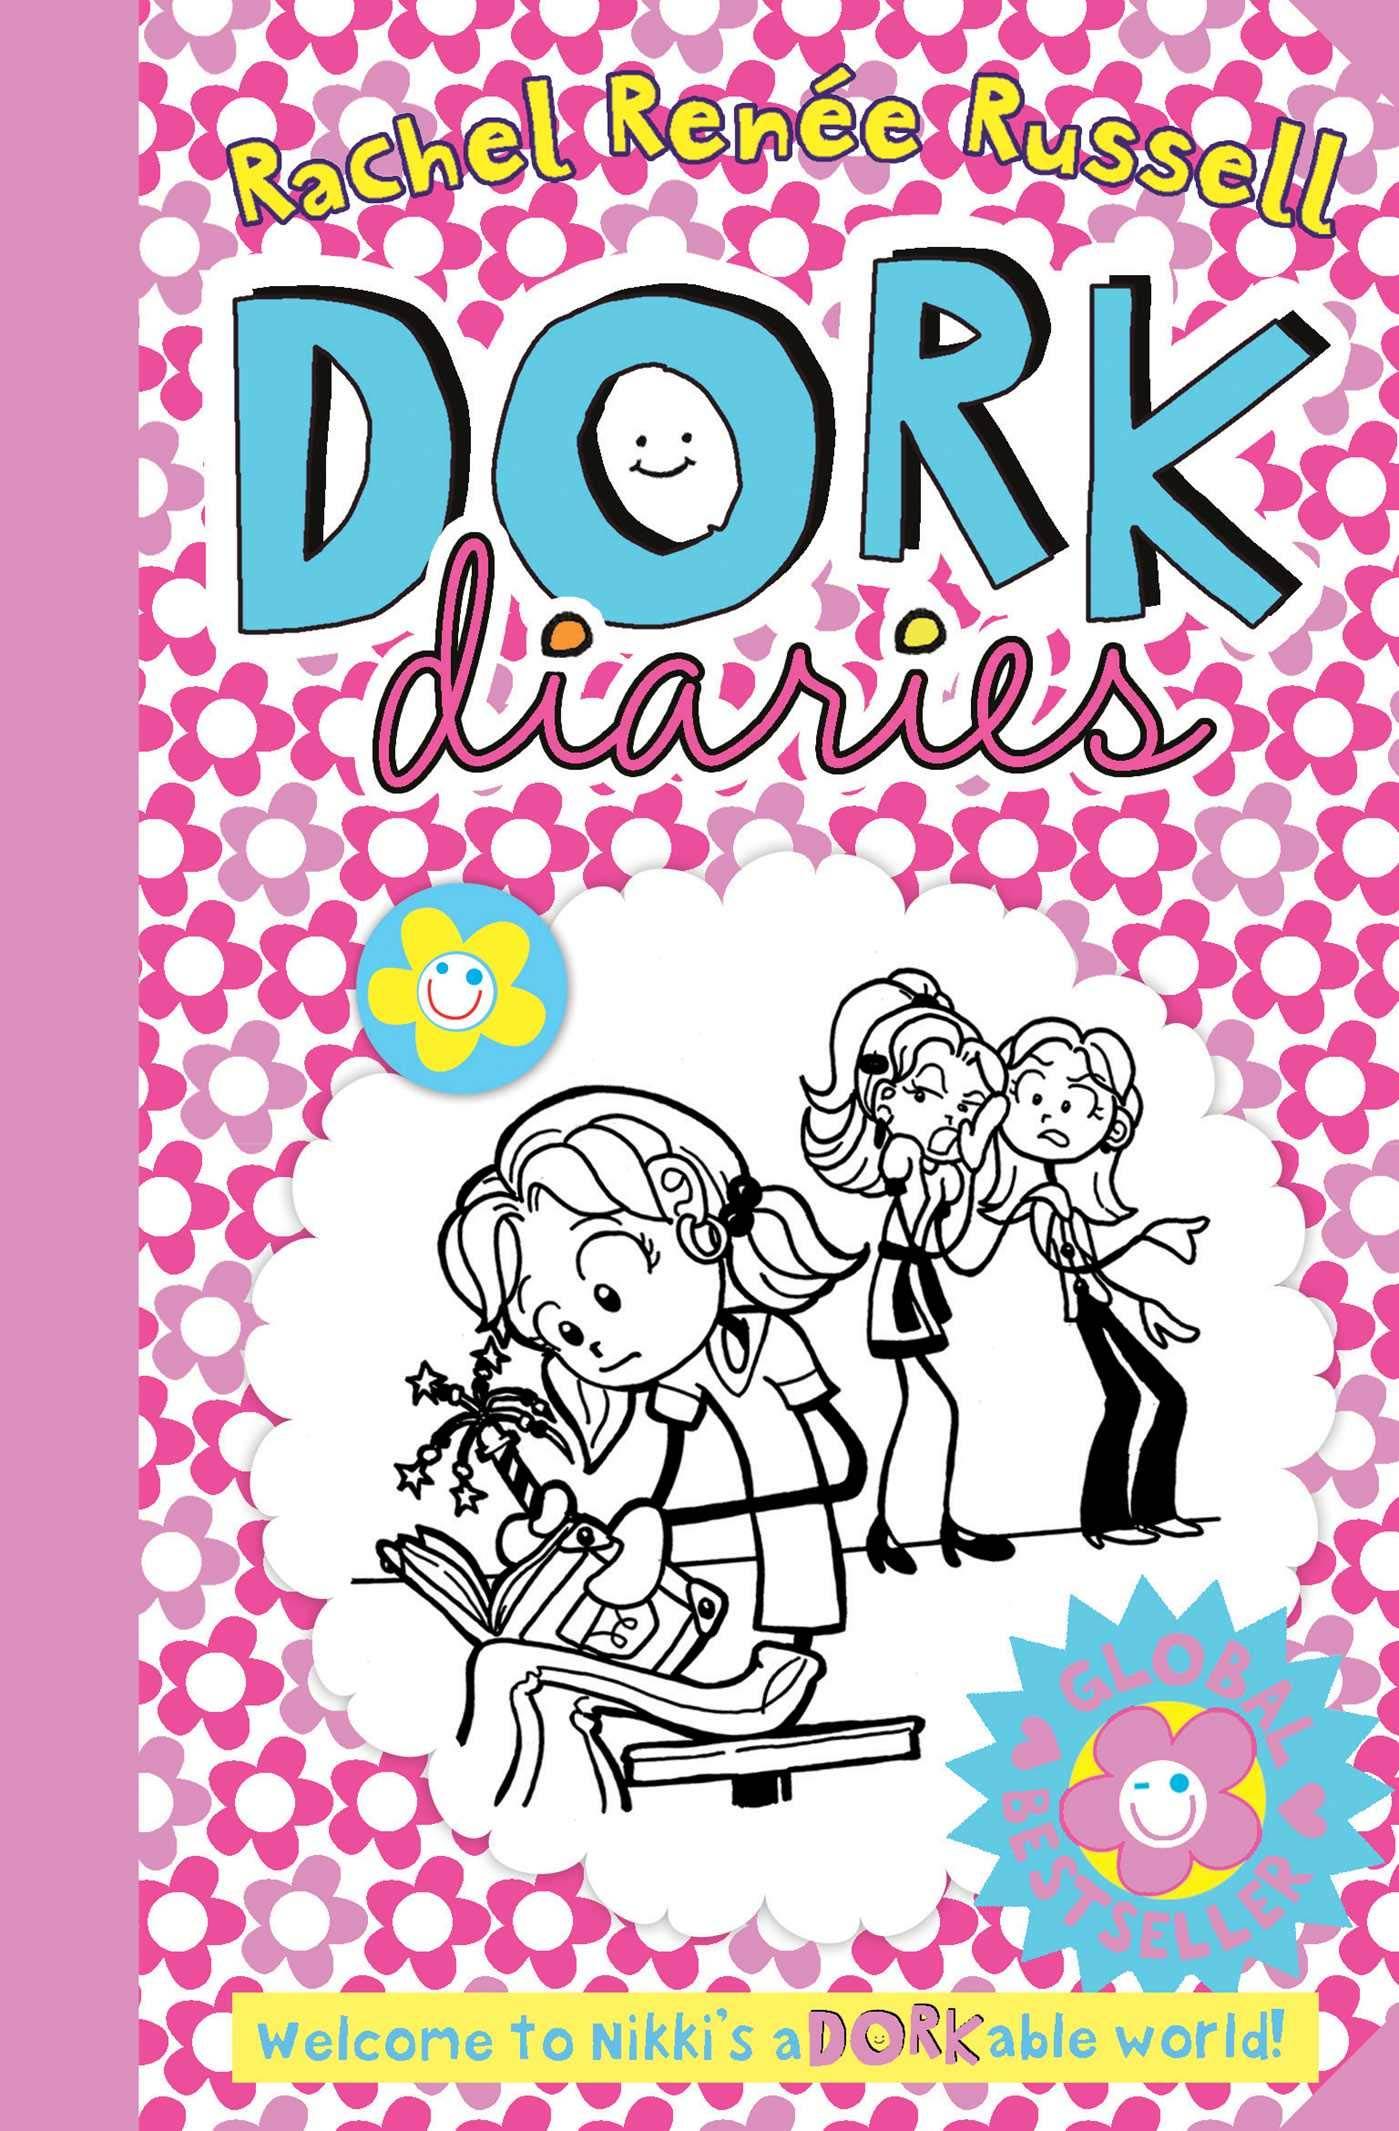 IMG : Dork Diaries Welcome to Nikki's a Dorkable world!